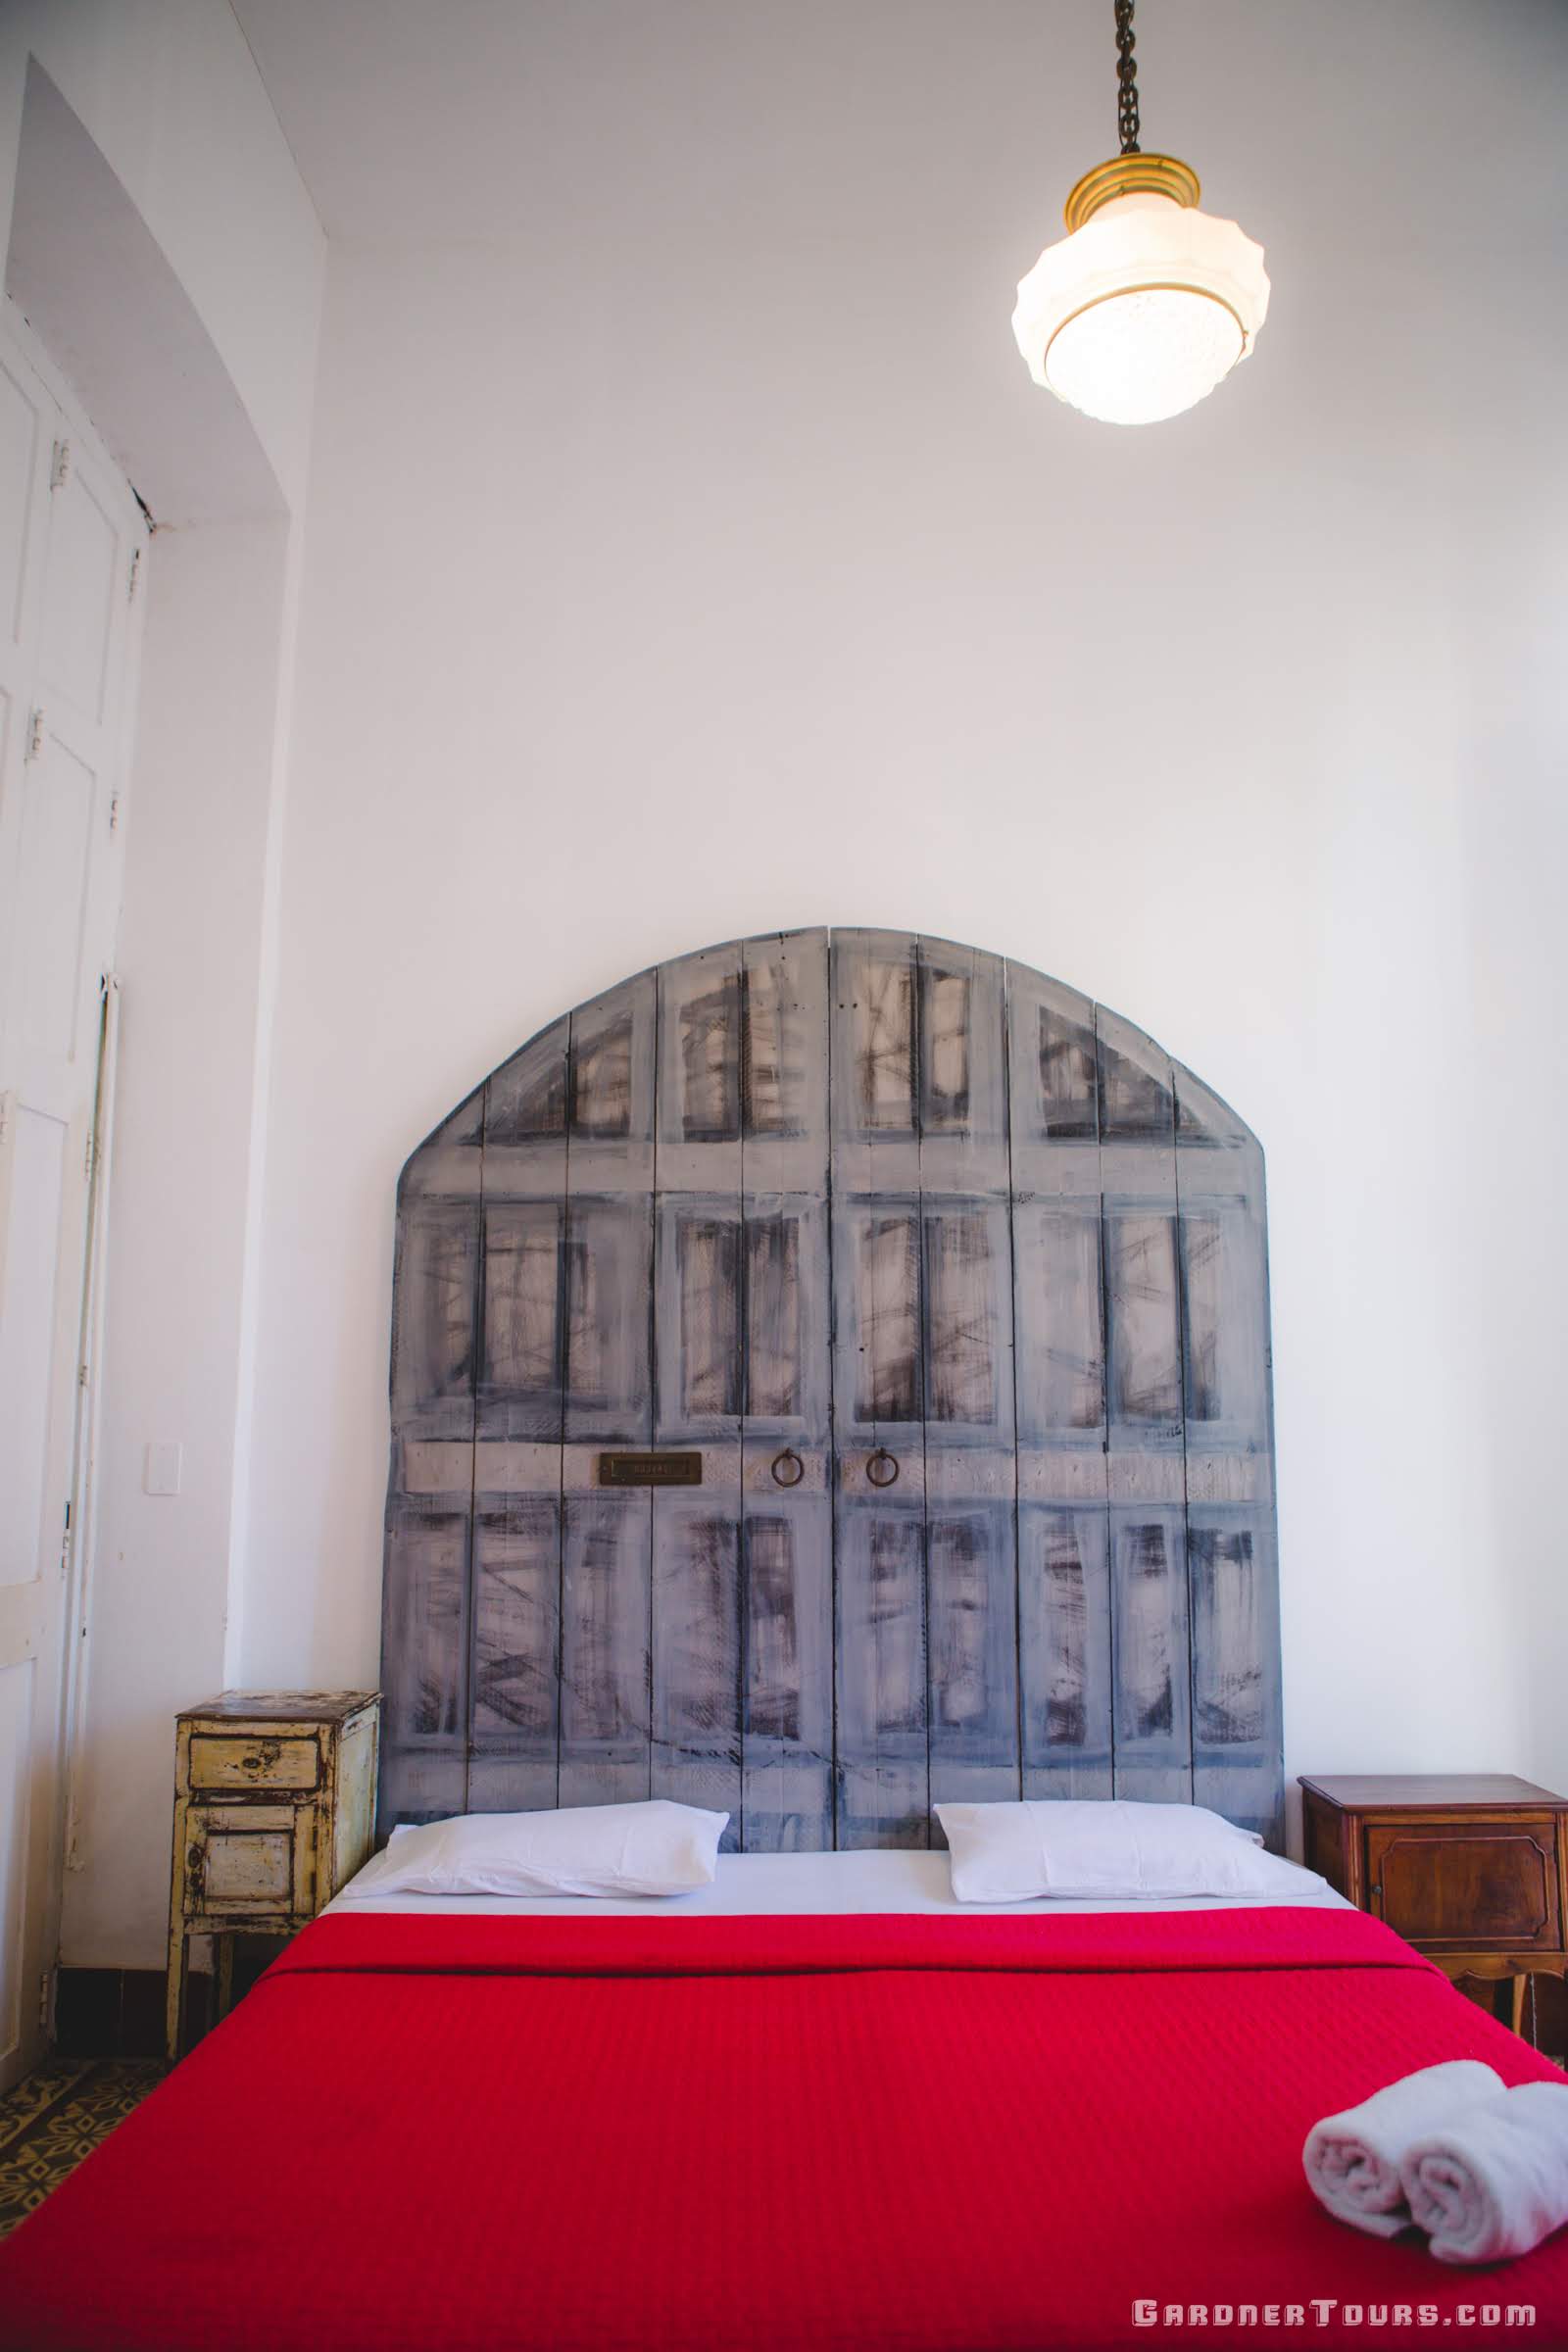 Comfortable Classic White and red Bedroom of a 3-star Casa Particular BnB in Old Havana, Cuba